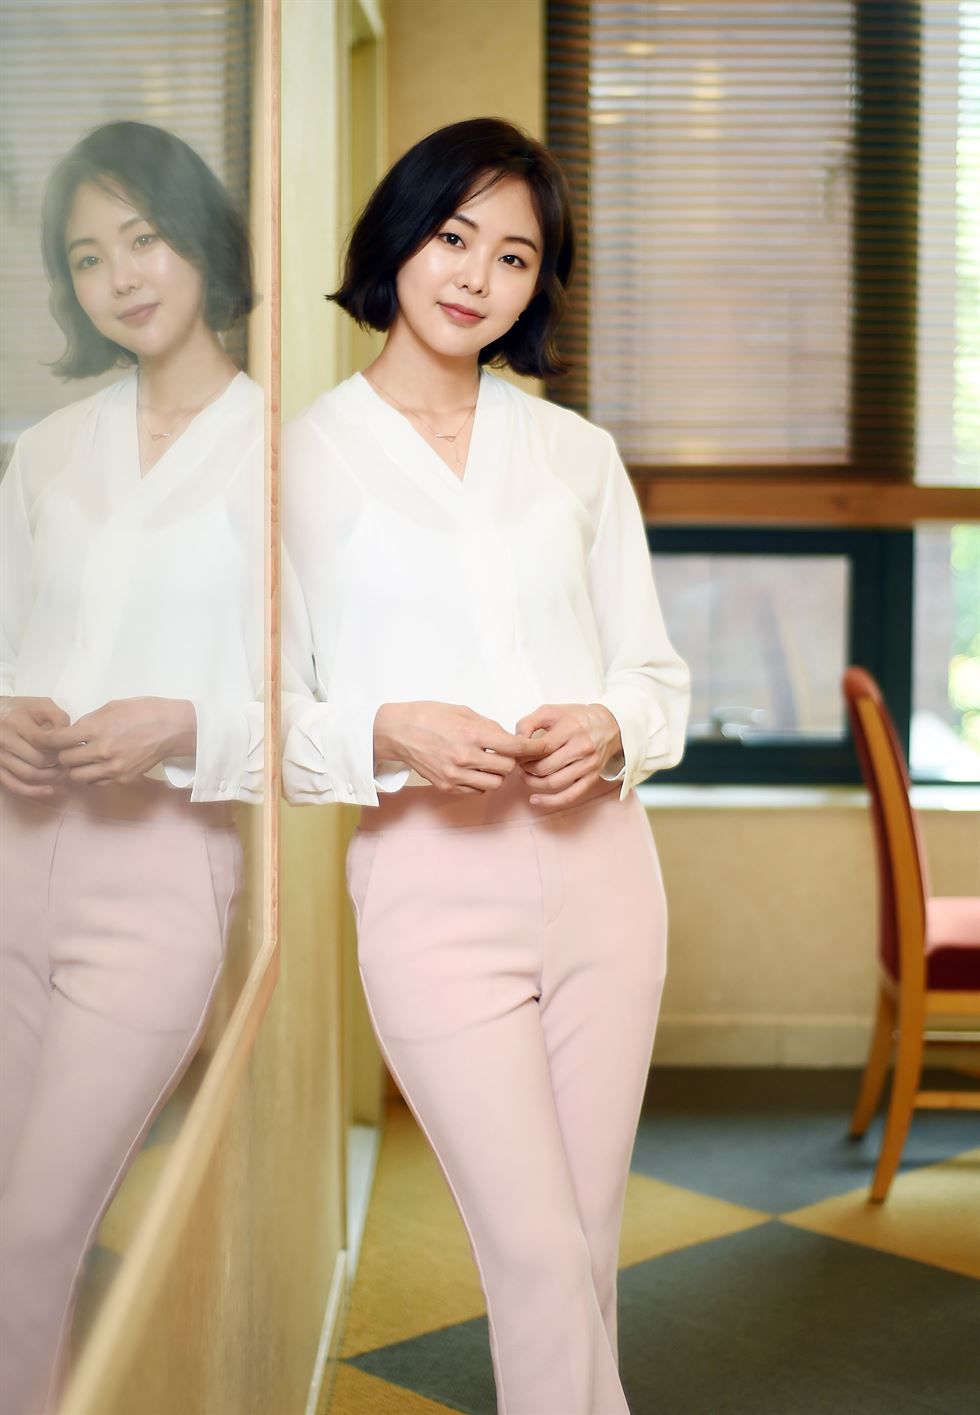 Keum Sae Rok Steals Hearts With 'innocent Smile' [PHOTOS]